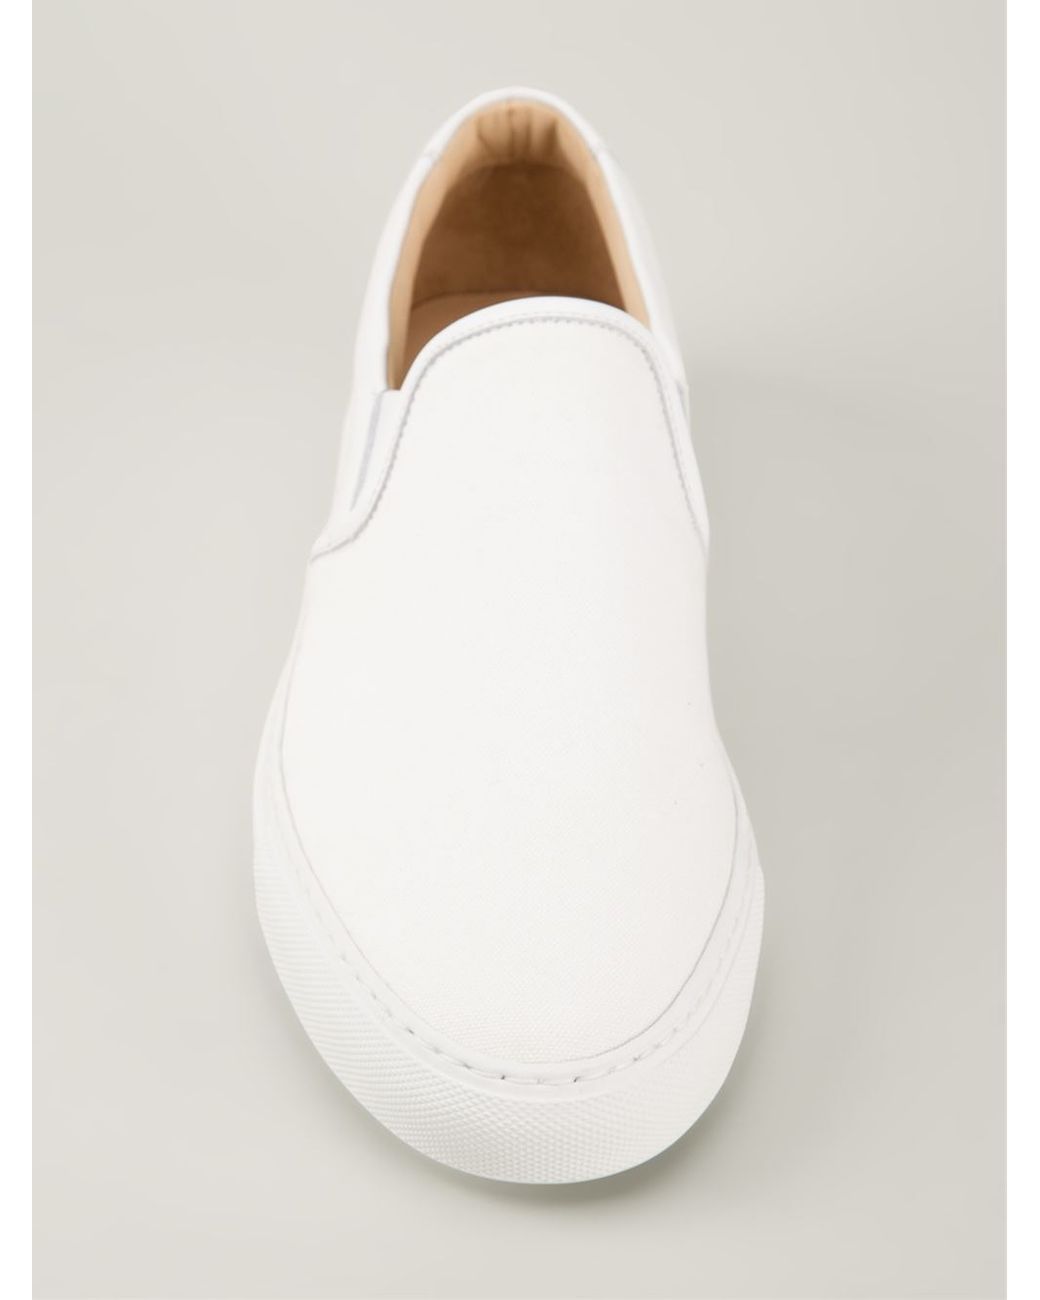 Common Projects Slip-On Sneakers in White for Men | Lyst